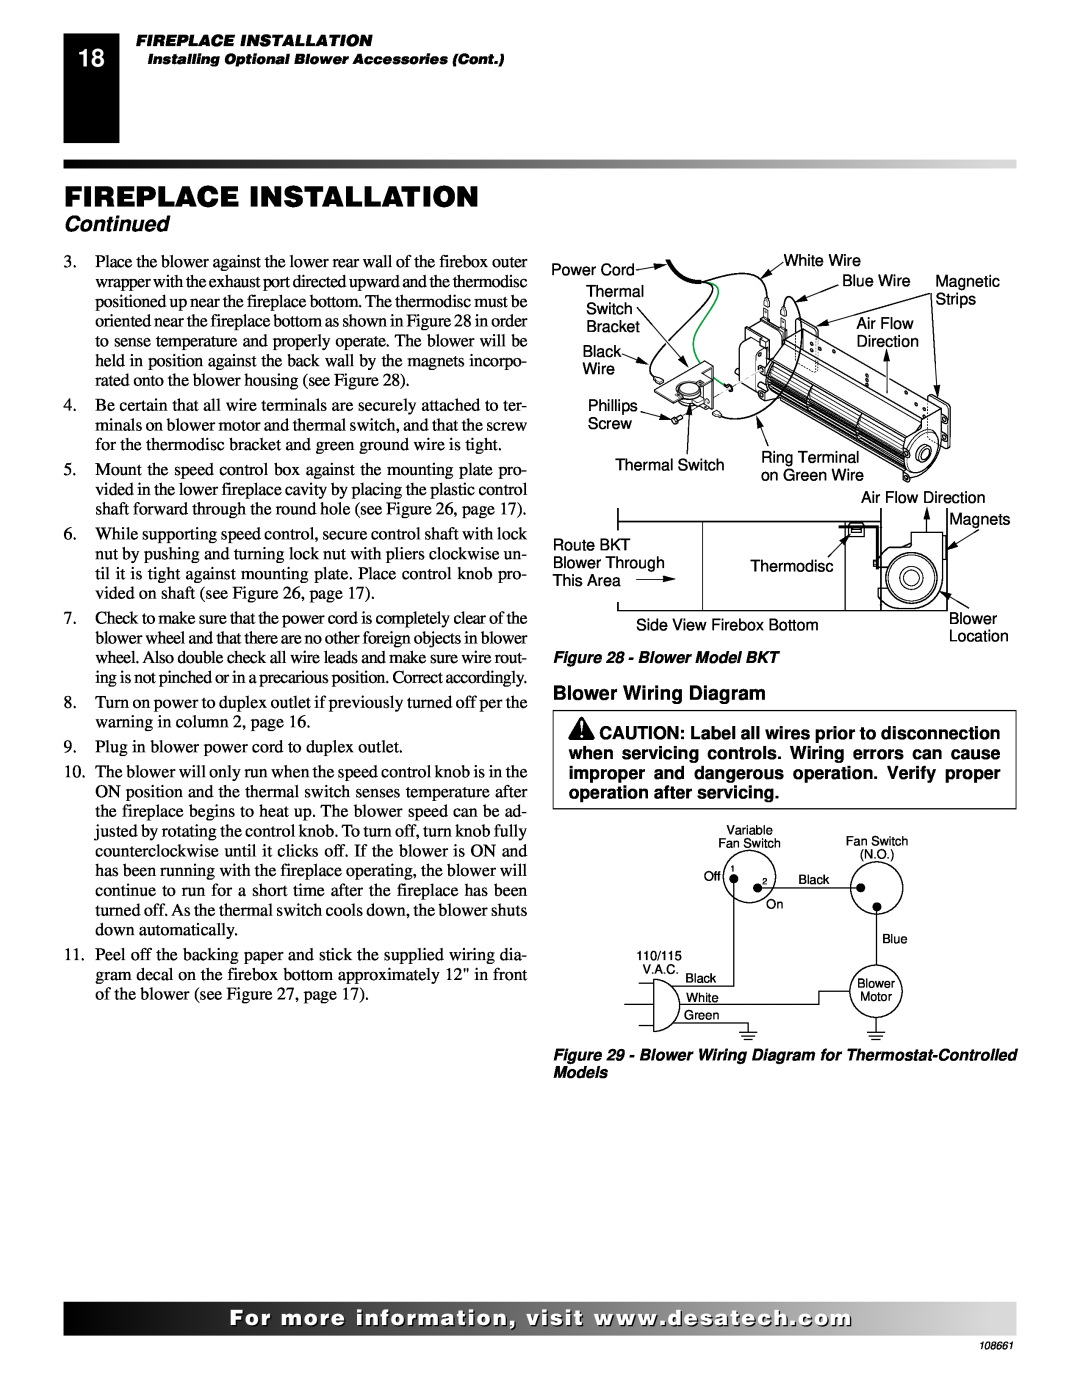 Desa T32N, T36N, T32P, T36P installation manual Fireplace Installation, Continued, Blower Wiring Diagram 